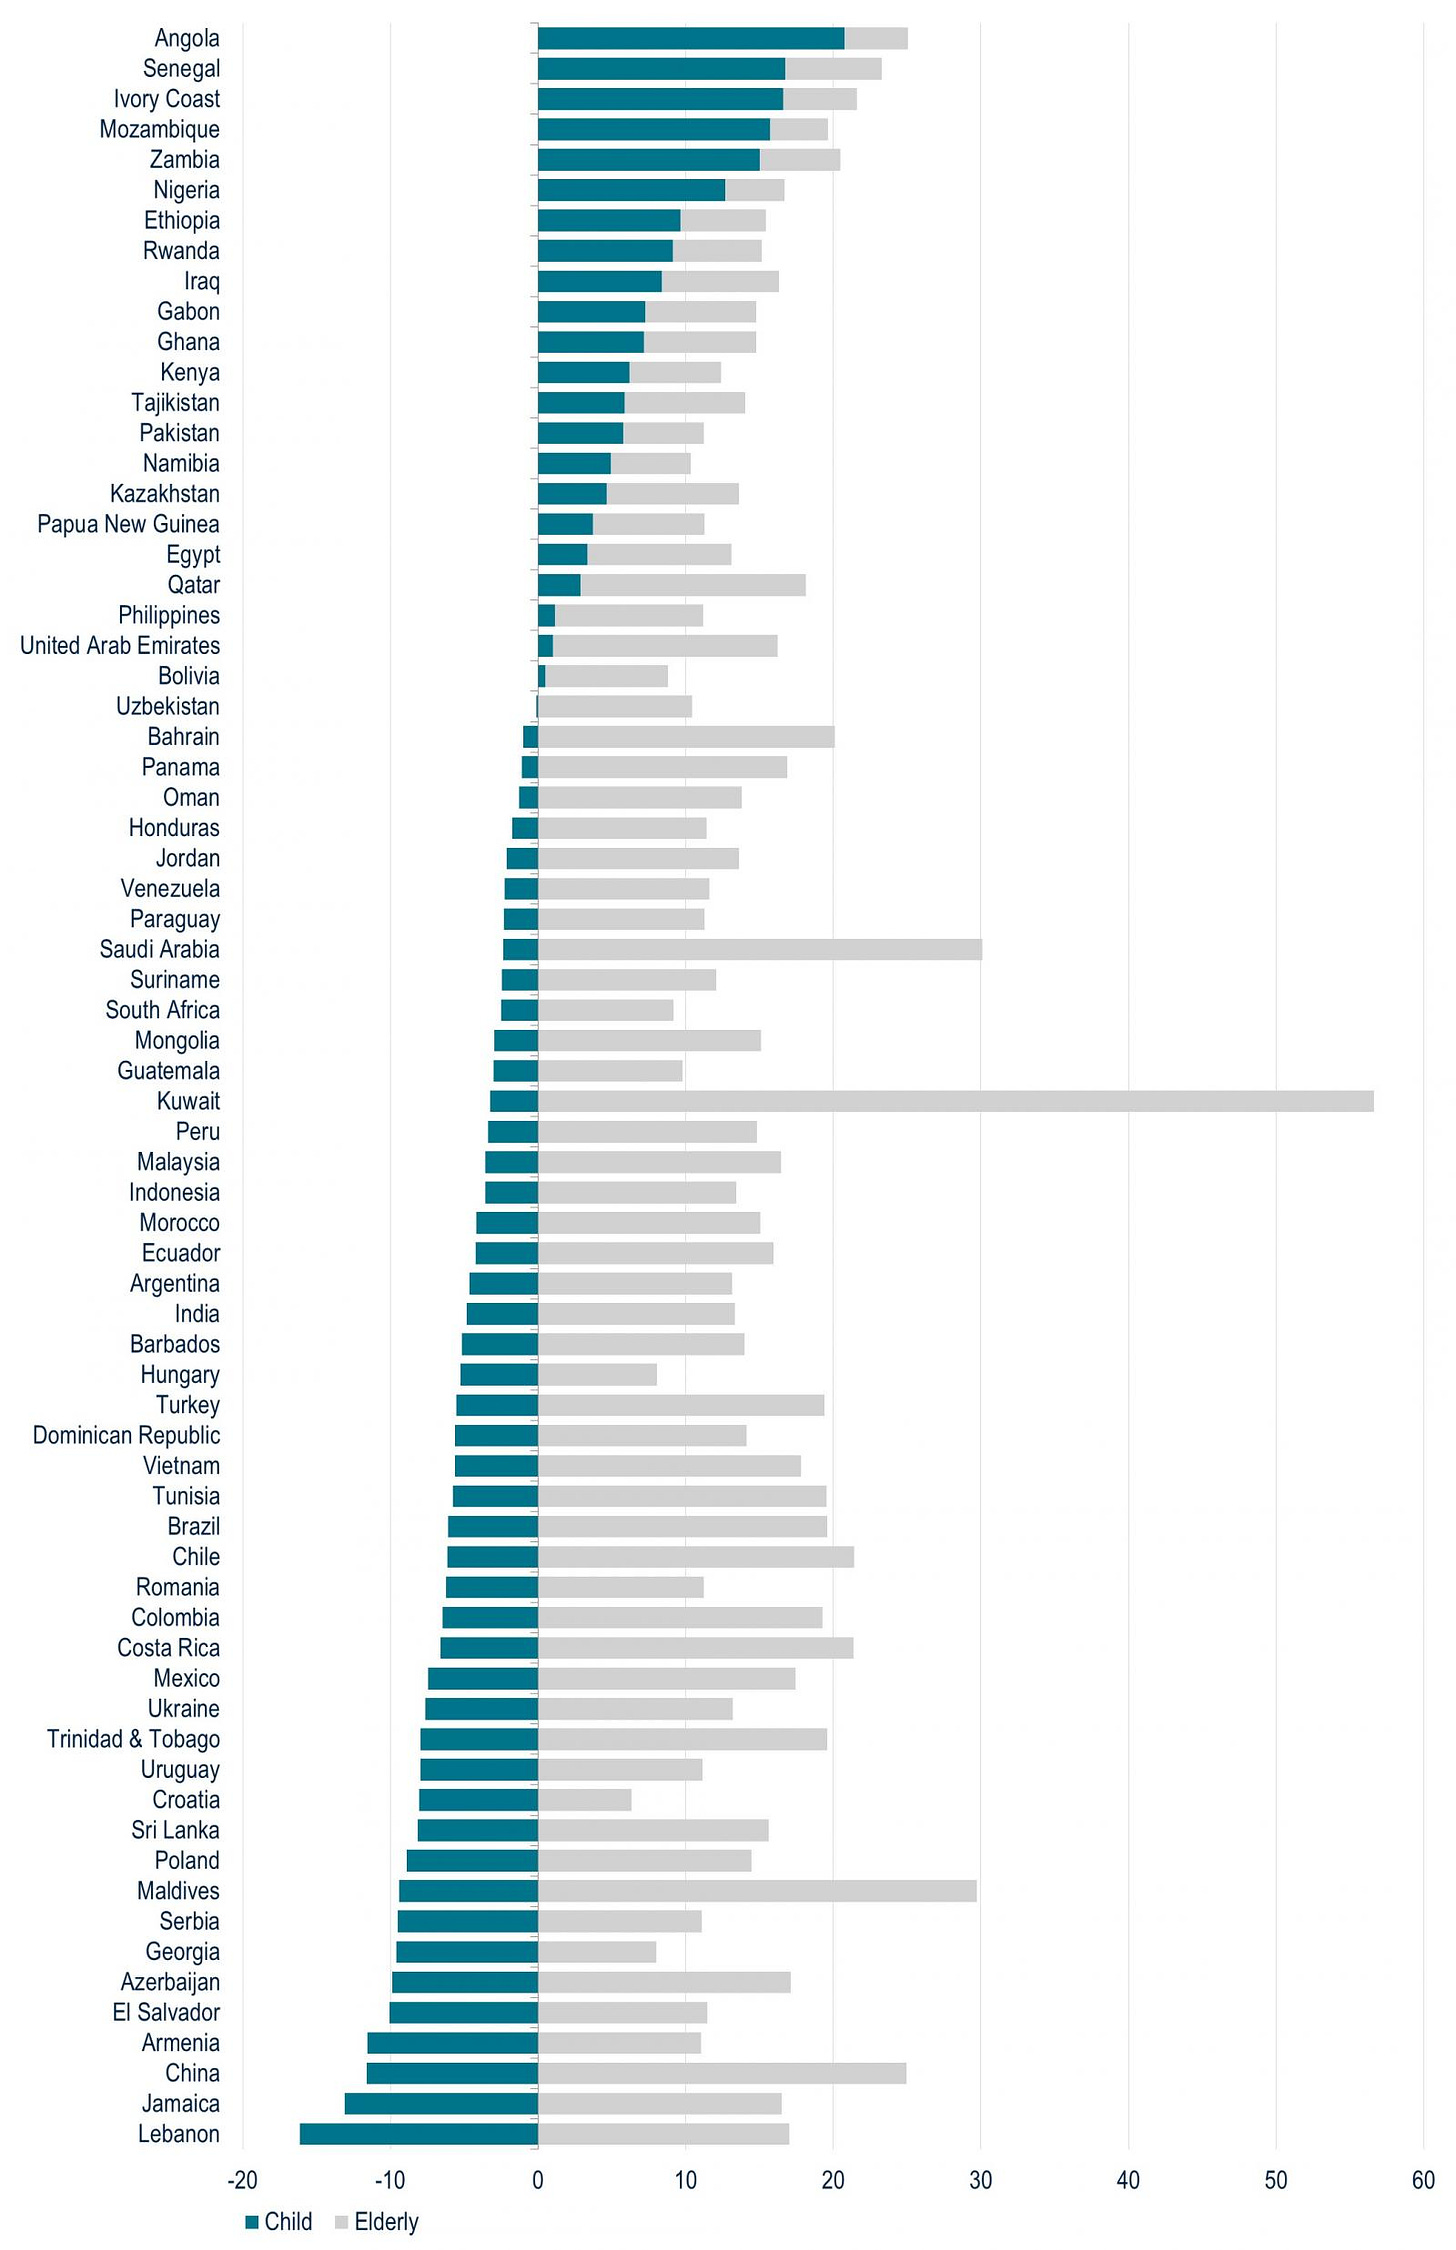 Ratios of child vs. elderly population from 2023 to 2050 for each EM country.